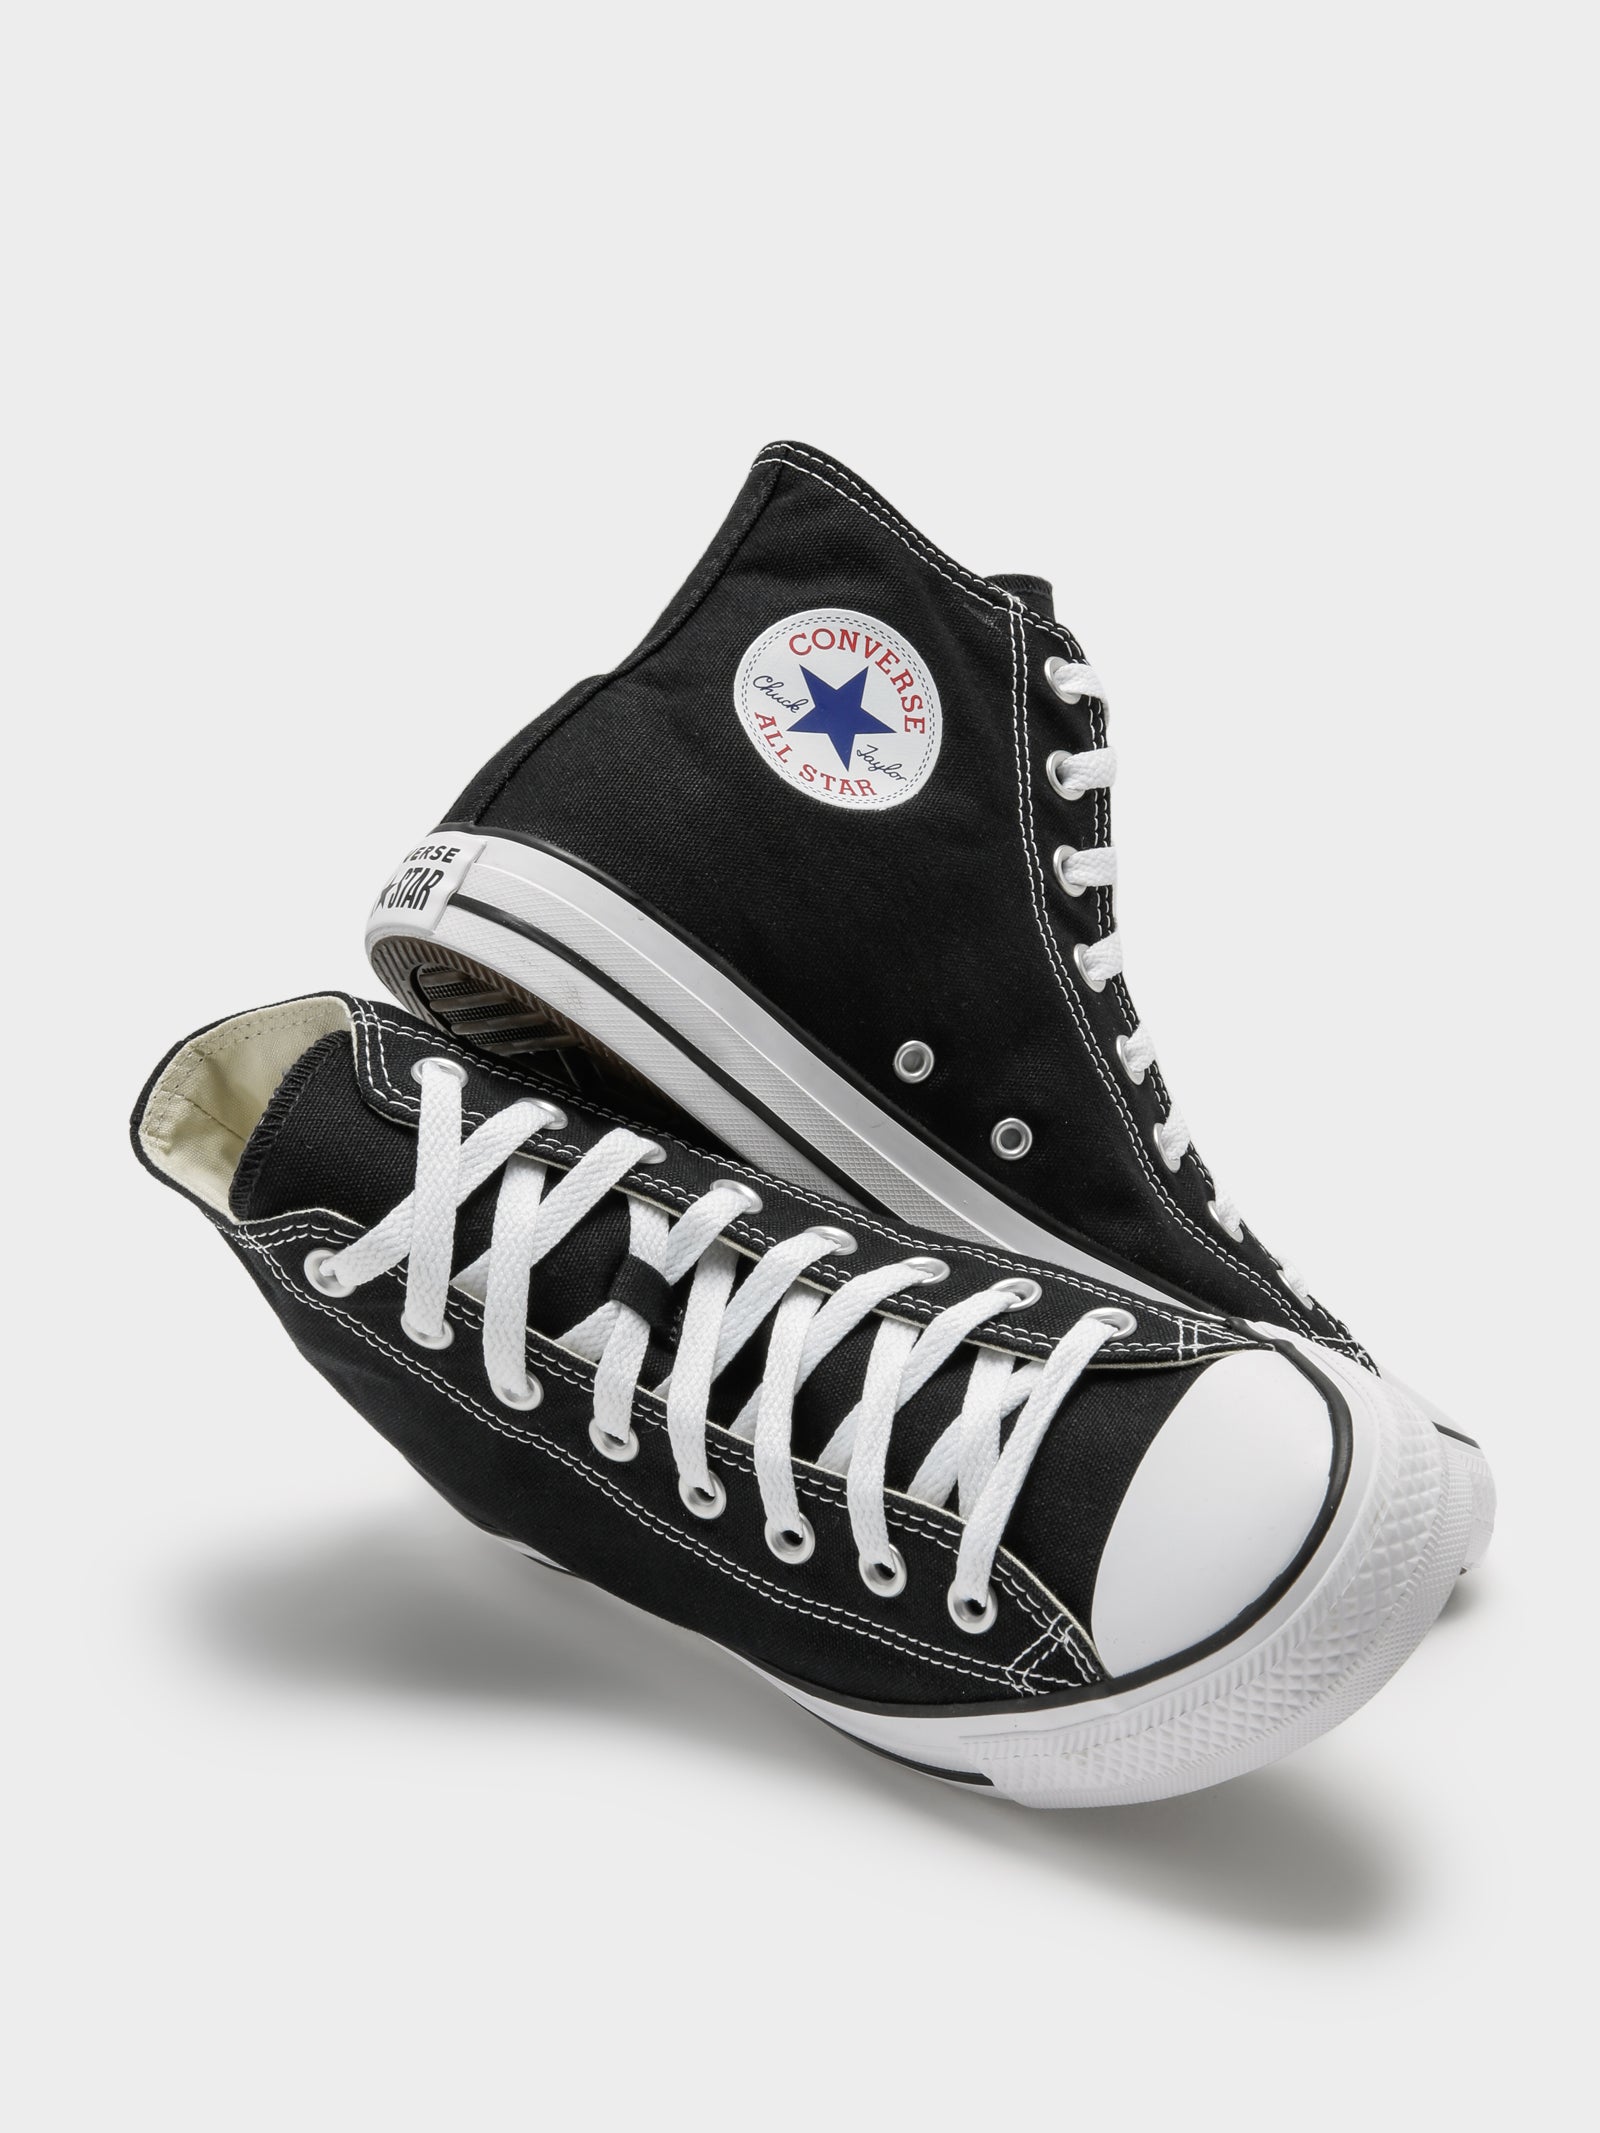 Unisex Chuck All Star High Top Sneakers in Black - Glue Store